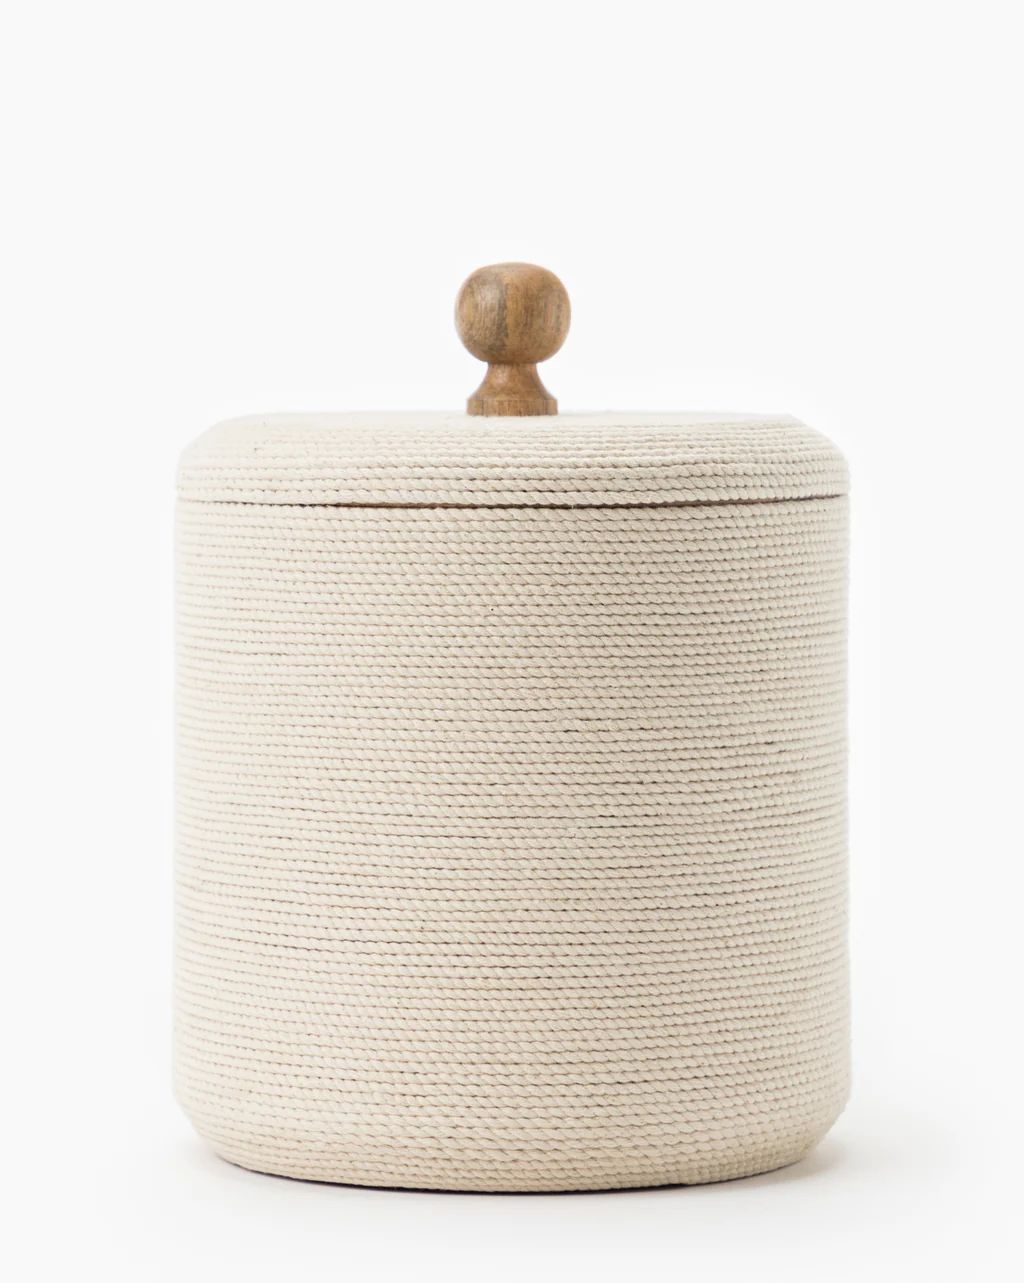 Wrapped Lidded Container | McGee & Co.